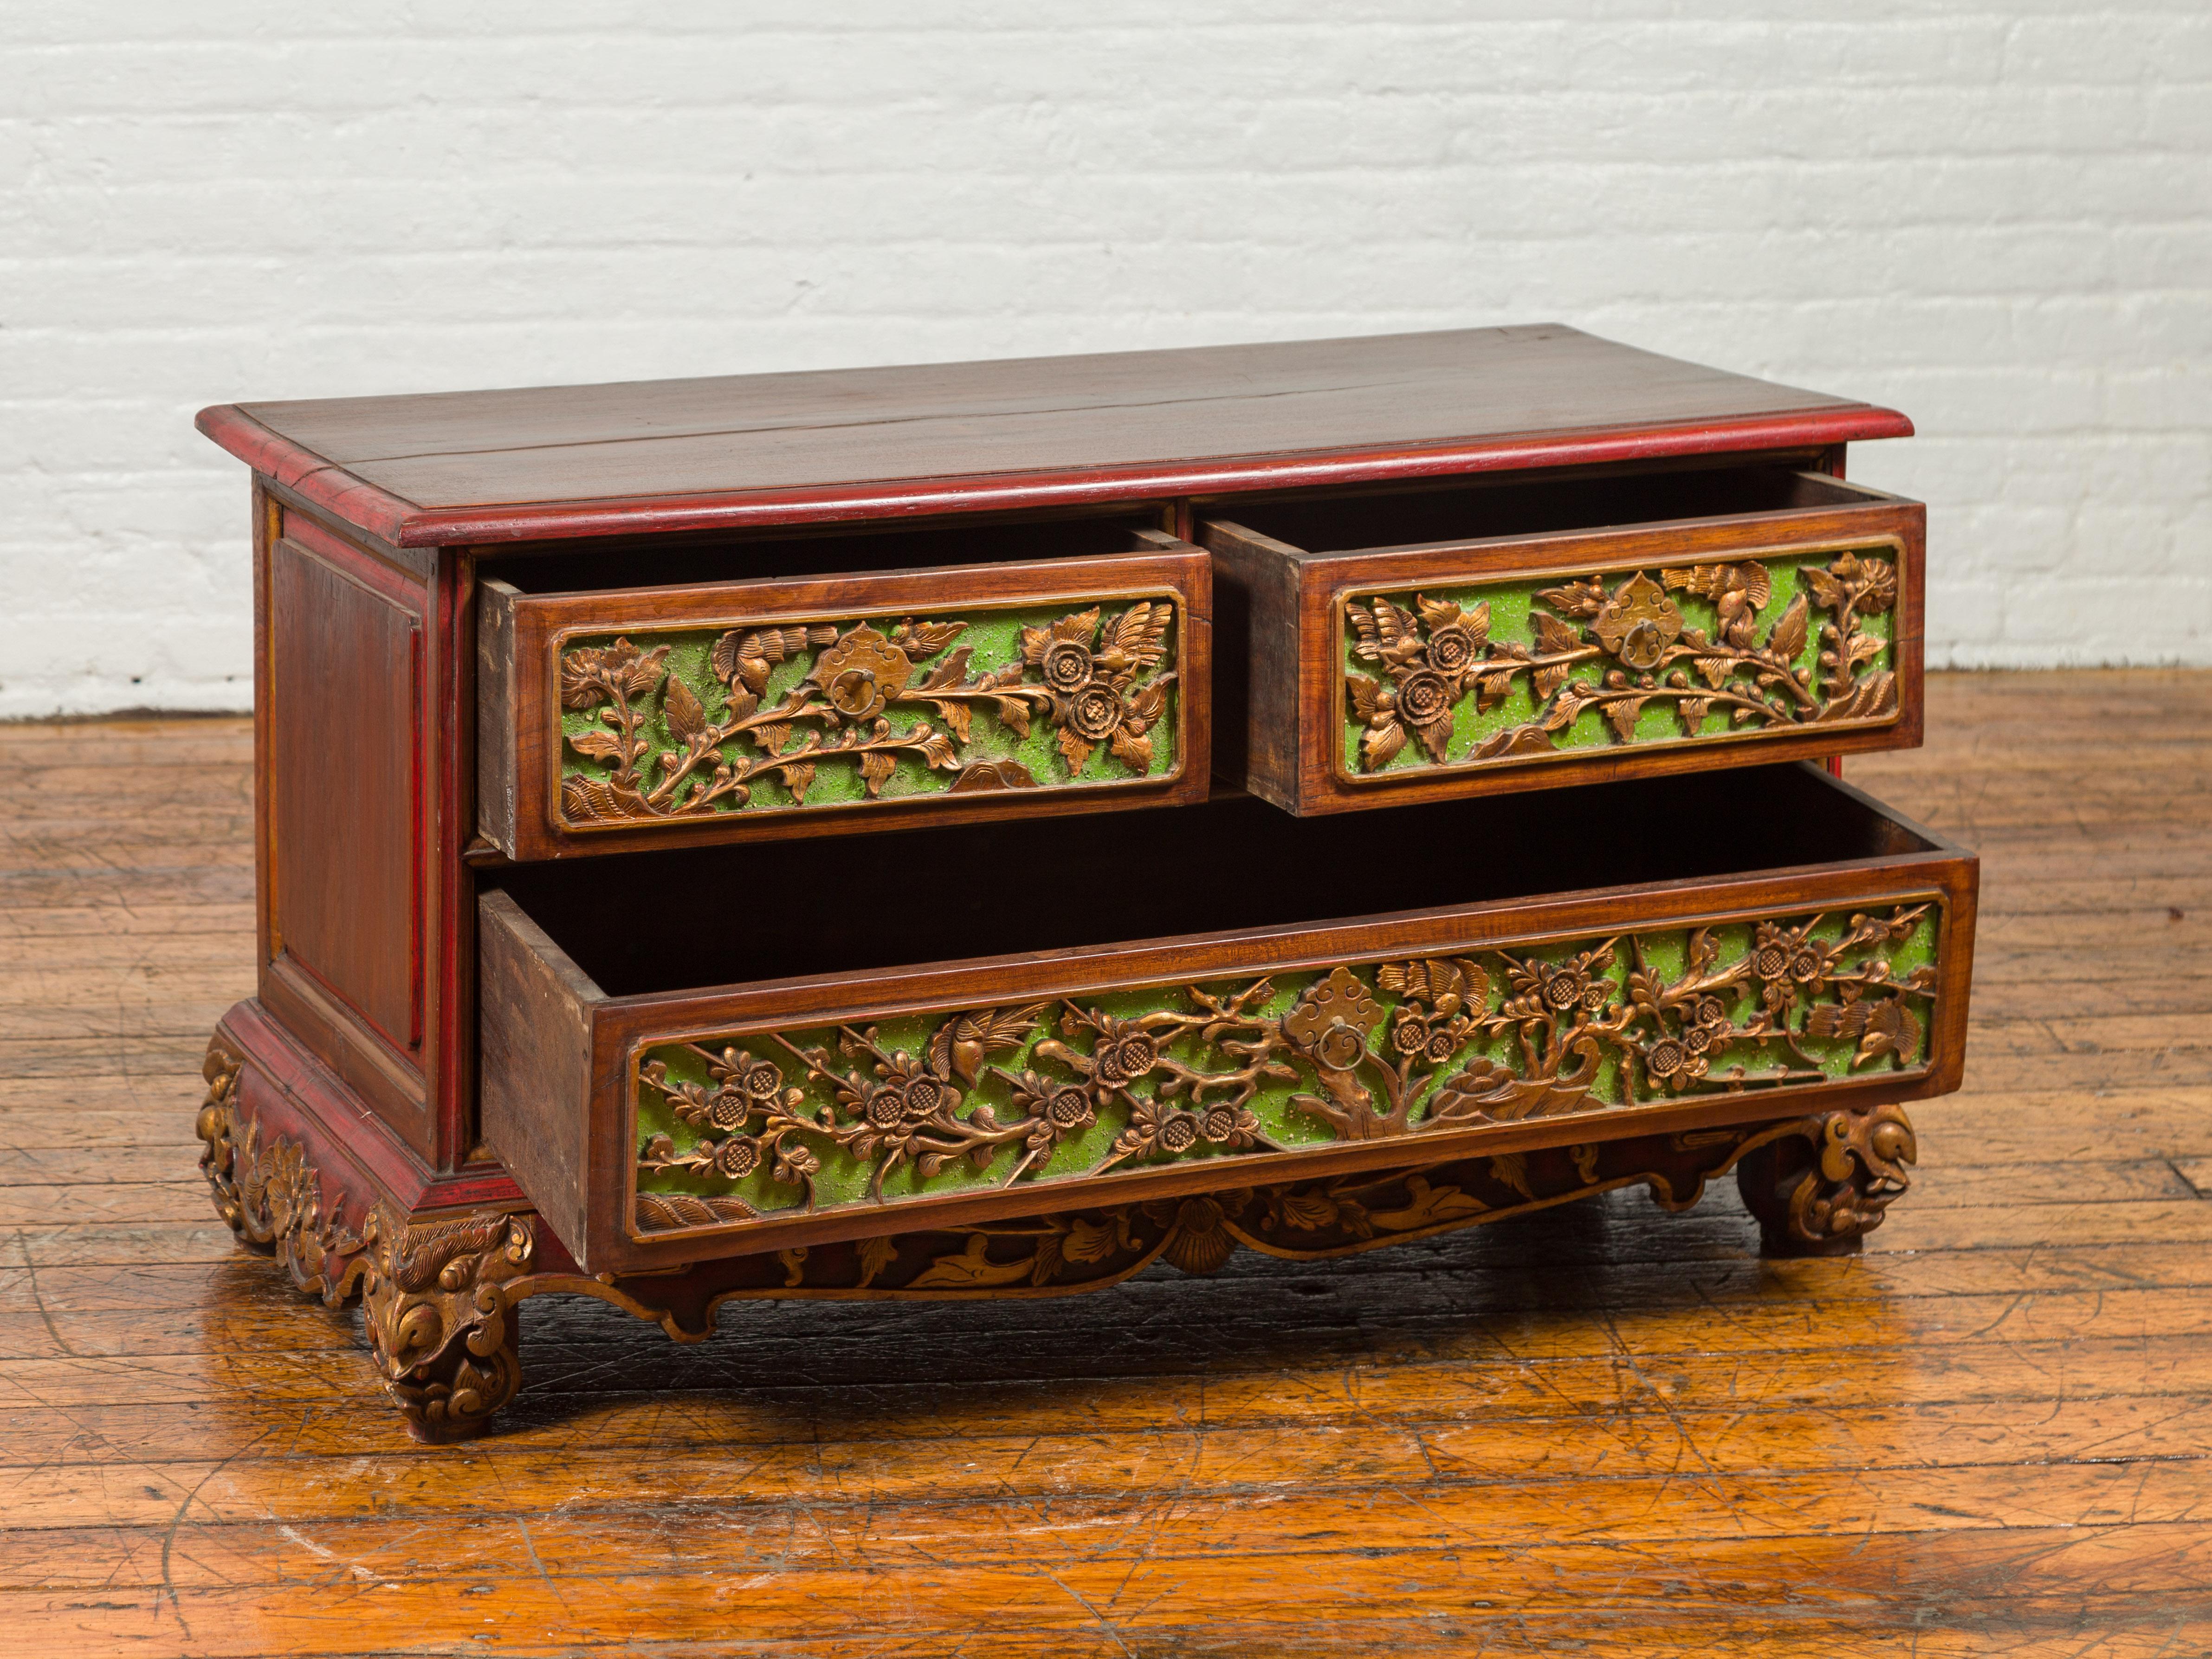 19th Century Polychrome Three-Drawer Chest from Madura with Carved Floral Motifs For Sale 8